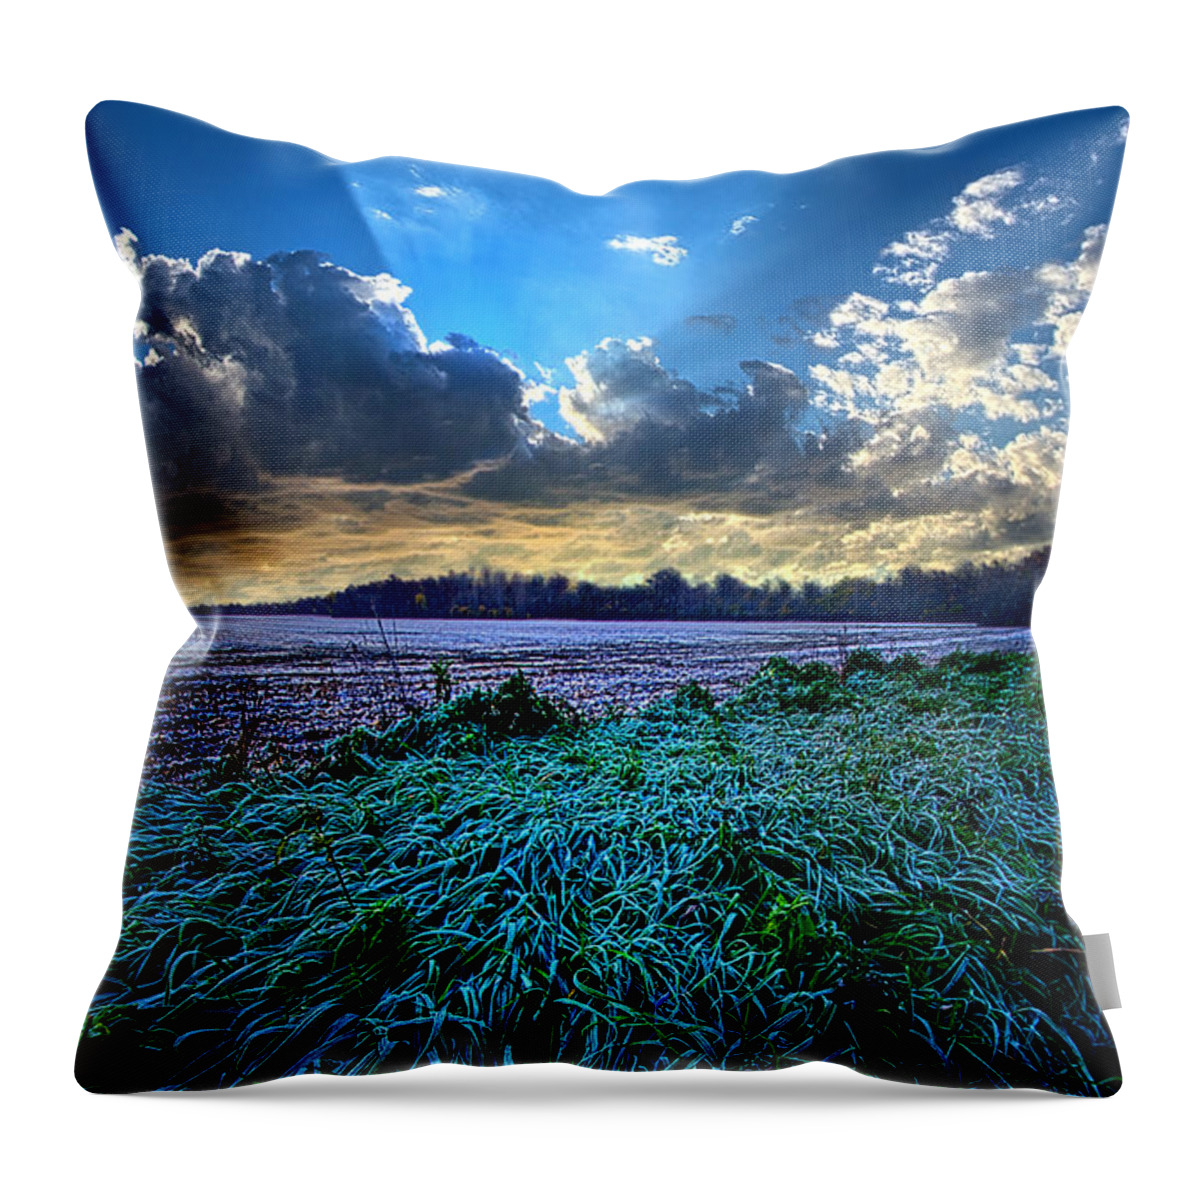  Frost Throw Pillow featuring the photograph A Frosty Morning by Phil Koch